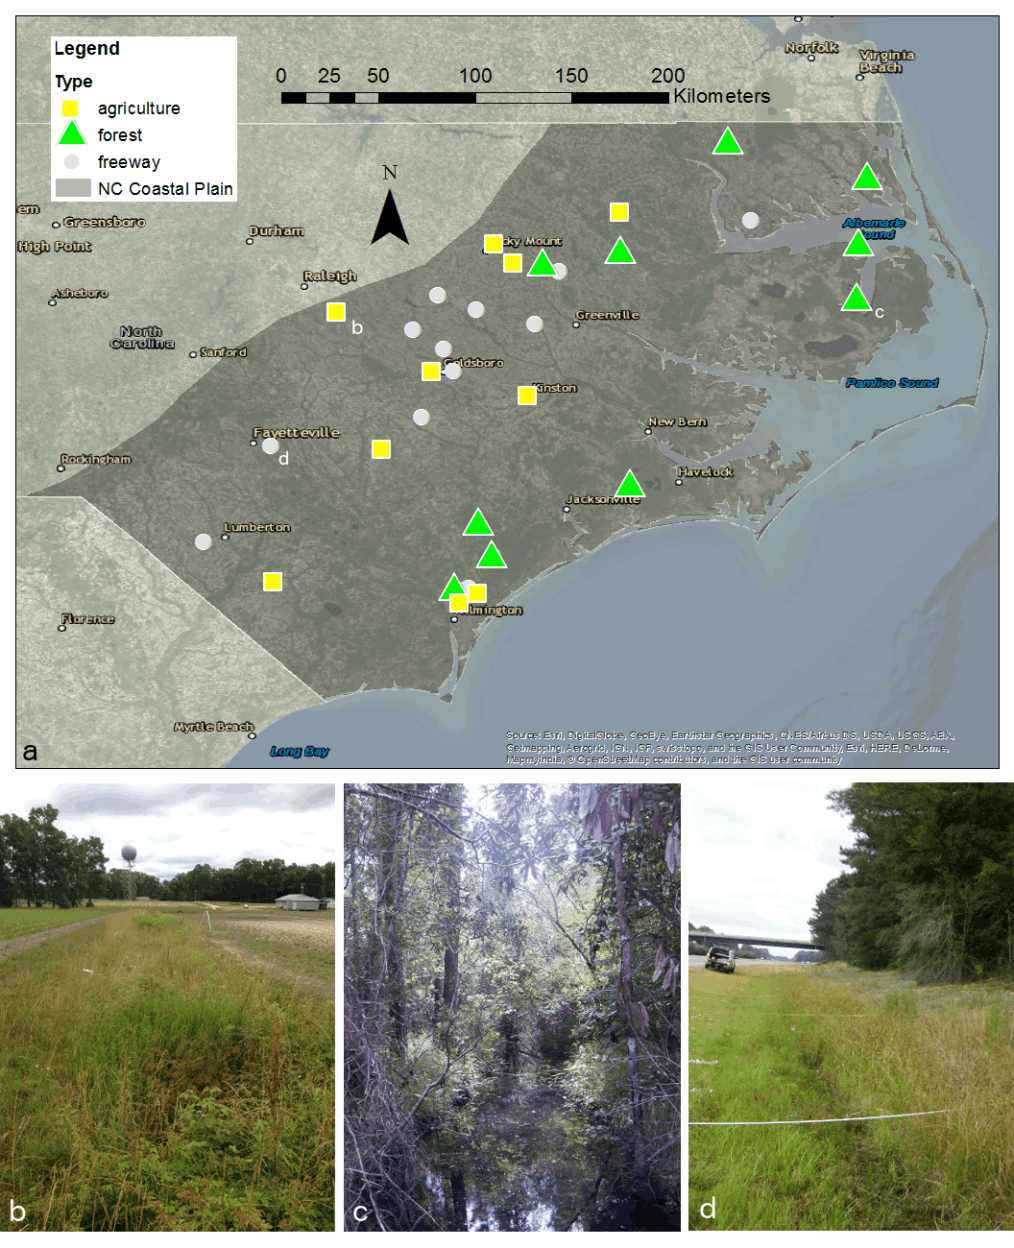 Map of 32 sites sampled in North Carolina Coastal Plain, with photographs of an agricultural, forested, and freeway ditch